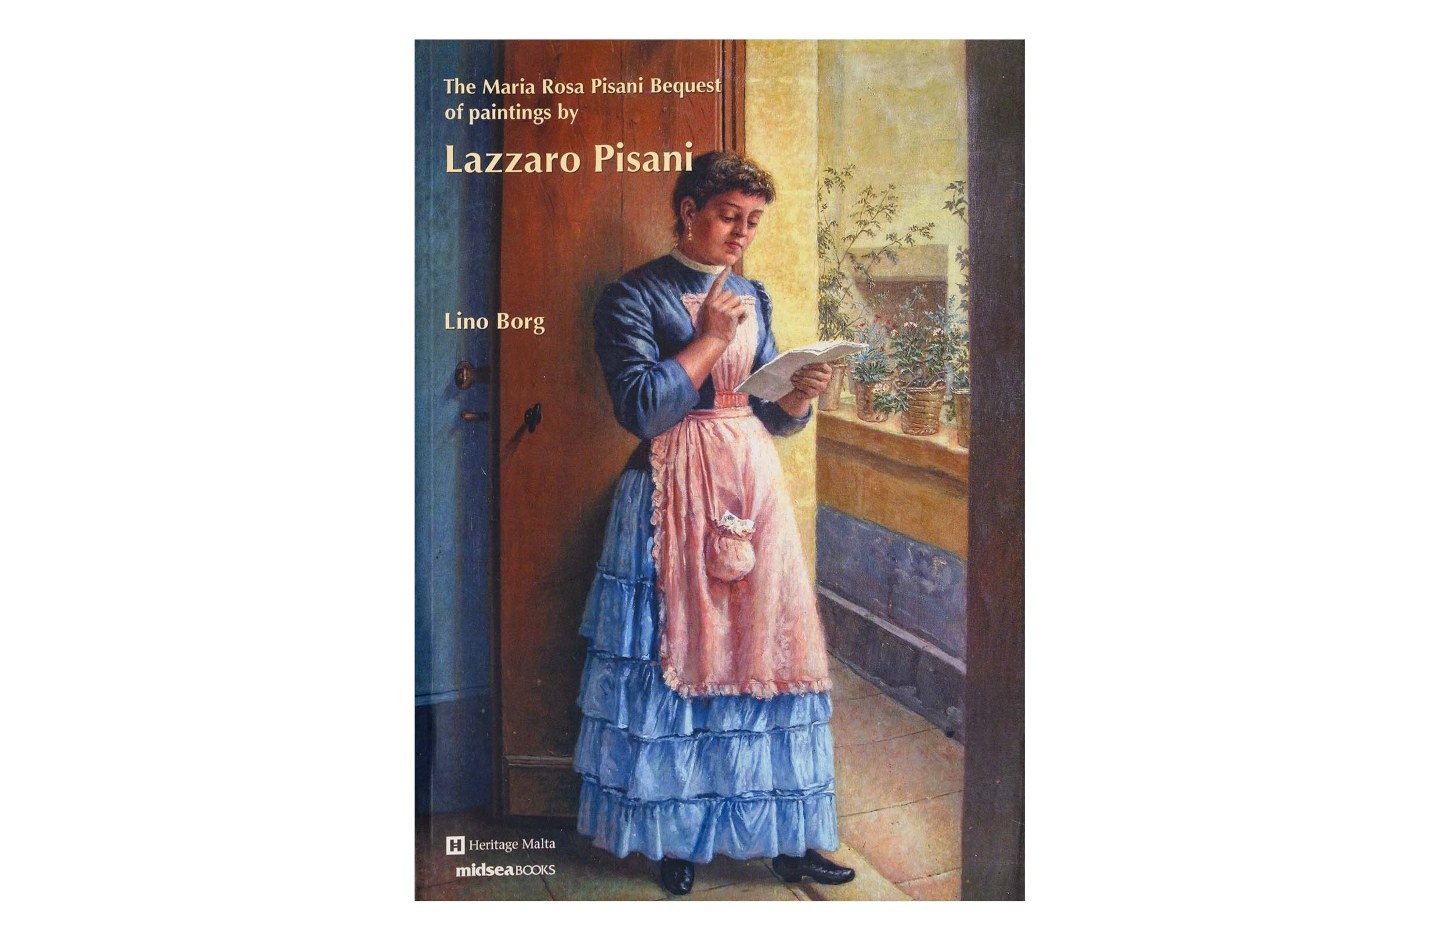 The Maria Rosa Pisani Bequest of paintings by Lazzaro Pisani